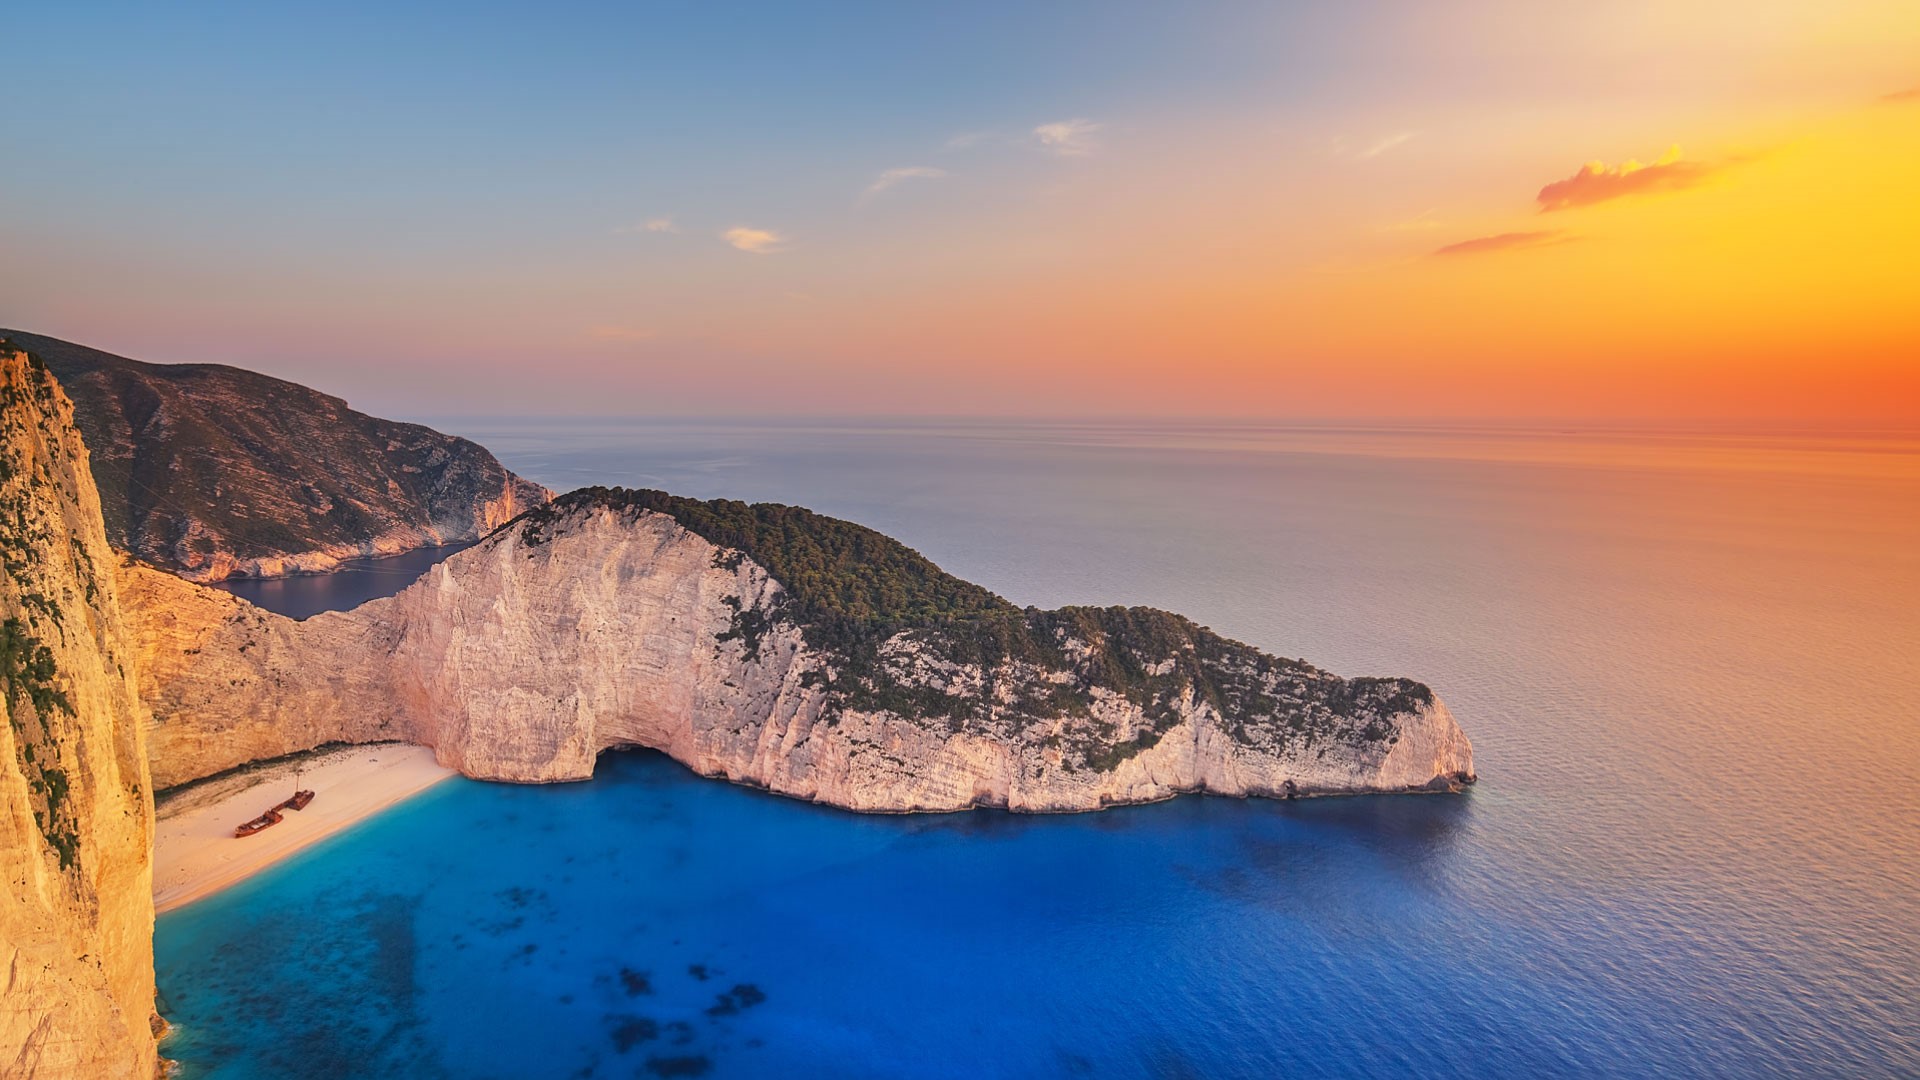 940090 beach, navagio beach, landscape, coast, plants, shipwreck, sand,  water, Greece, nature, mountains, top view - Rare Gallery HD Wallpapers